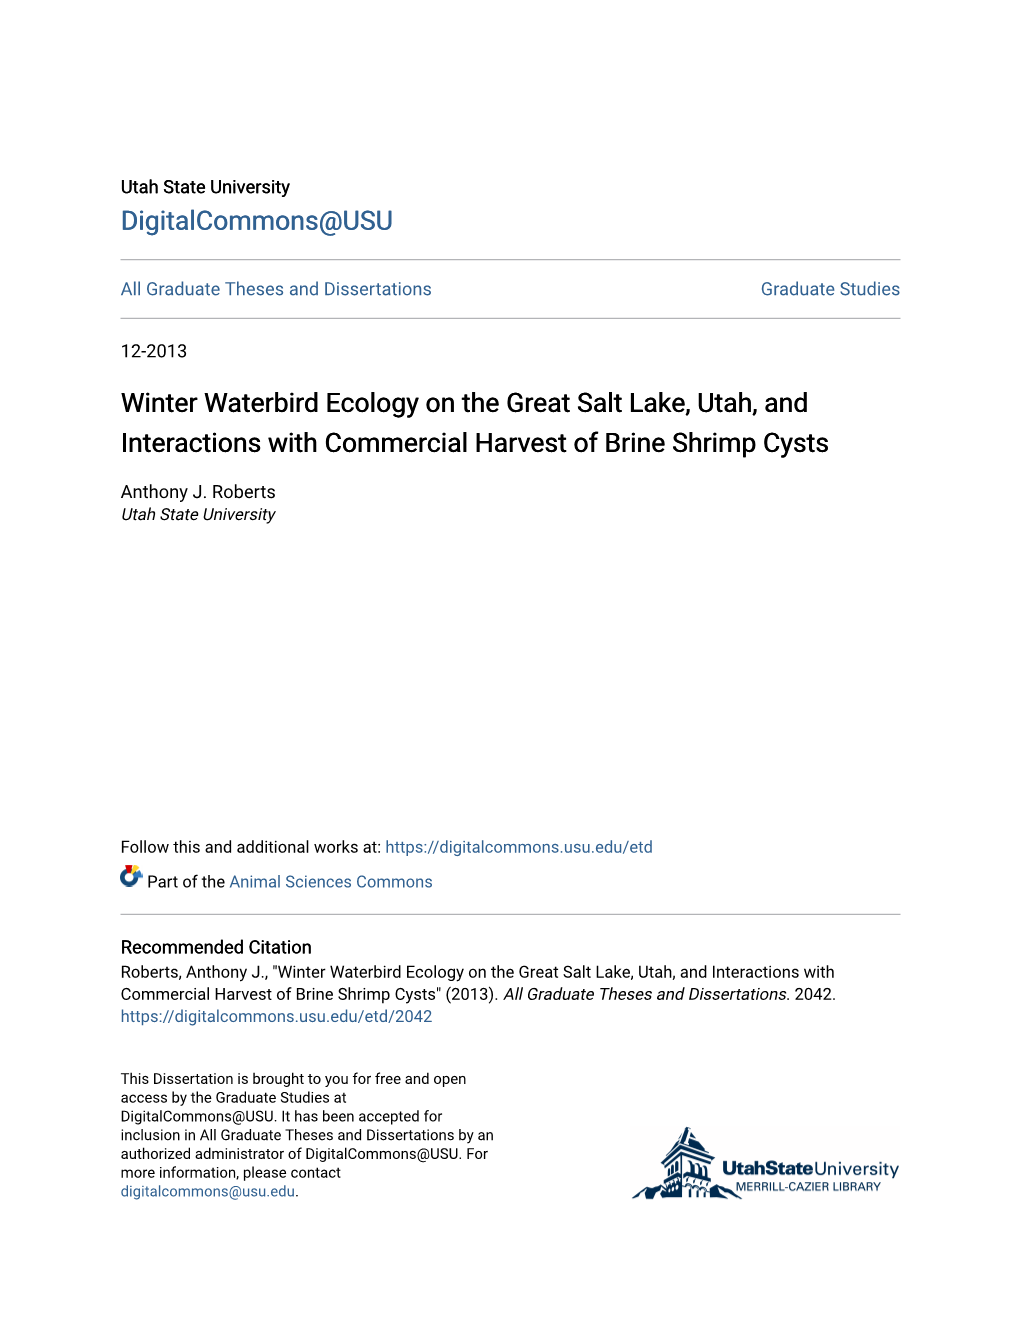 Winter Waterbird Ecology on the Great Salt Lake, Utah, and Interactions with Commercial Harvest of Brine Shrimp Cysts